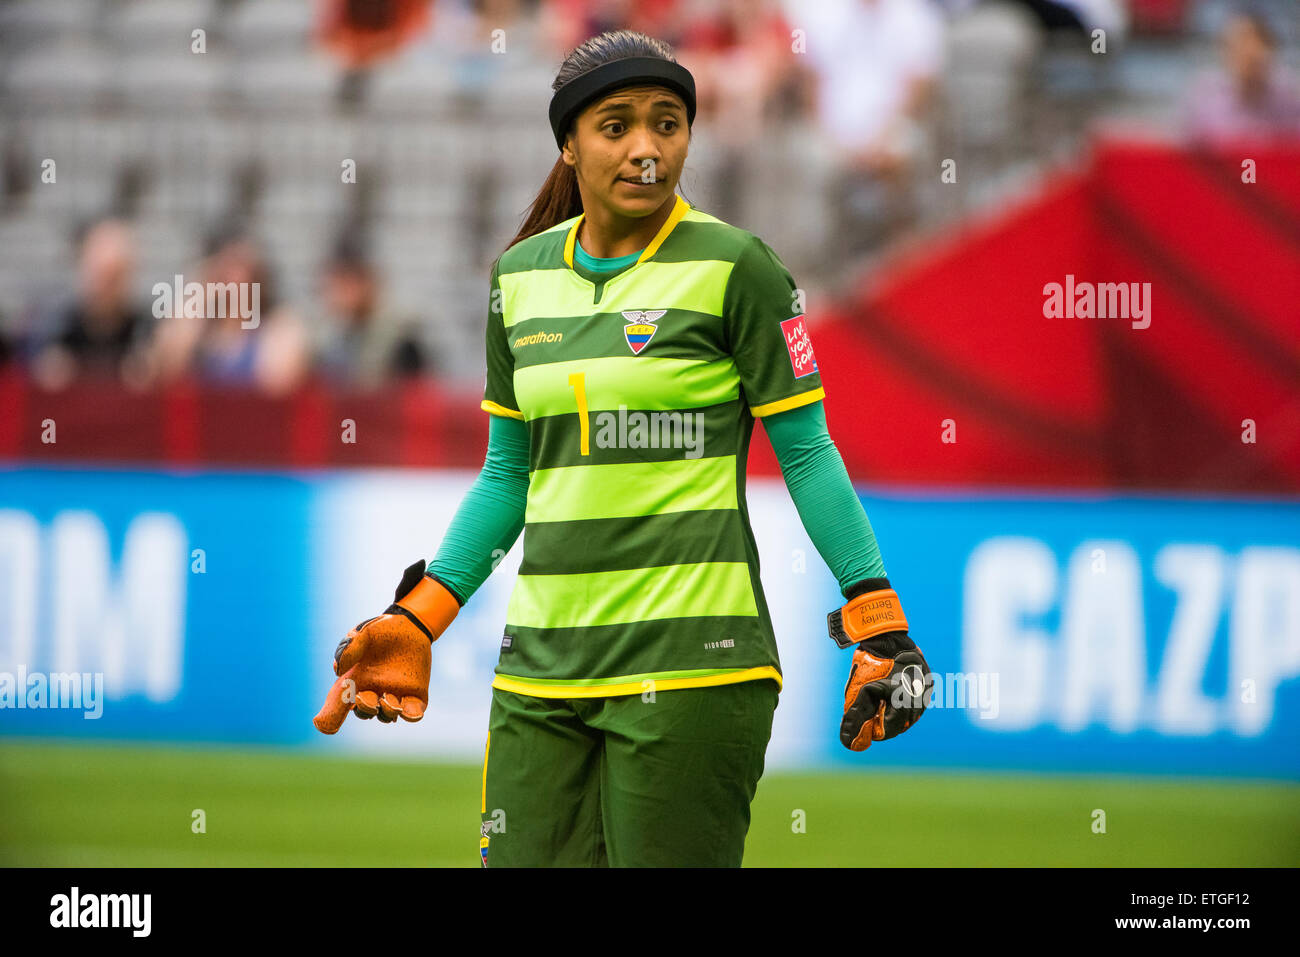 Vancouver, Canada - June 12, 2015: Ecuador goalkeeper Shirley BERRUZ (#1) during the opening round match between Switzerland and Ecuador of the FIFA Women's World Cup Canada 2015 at BC Place Stadium. Switzerland won the match 10-1. Stock Photo